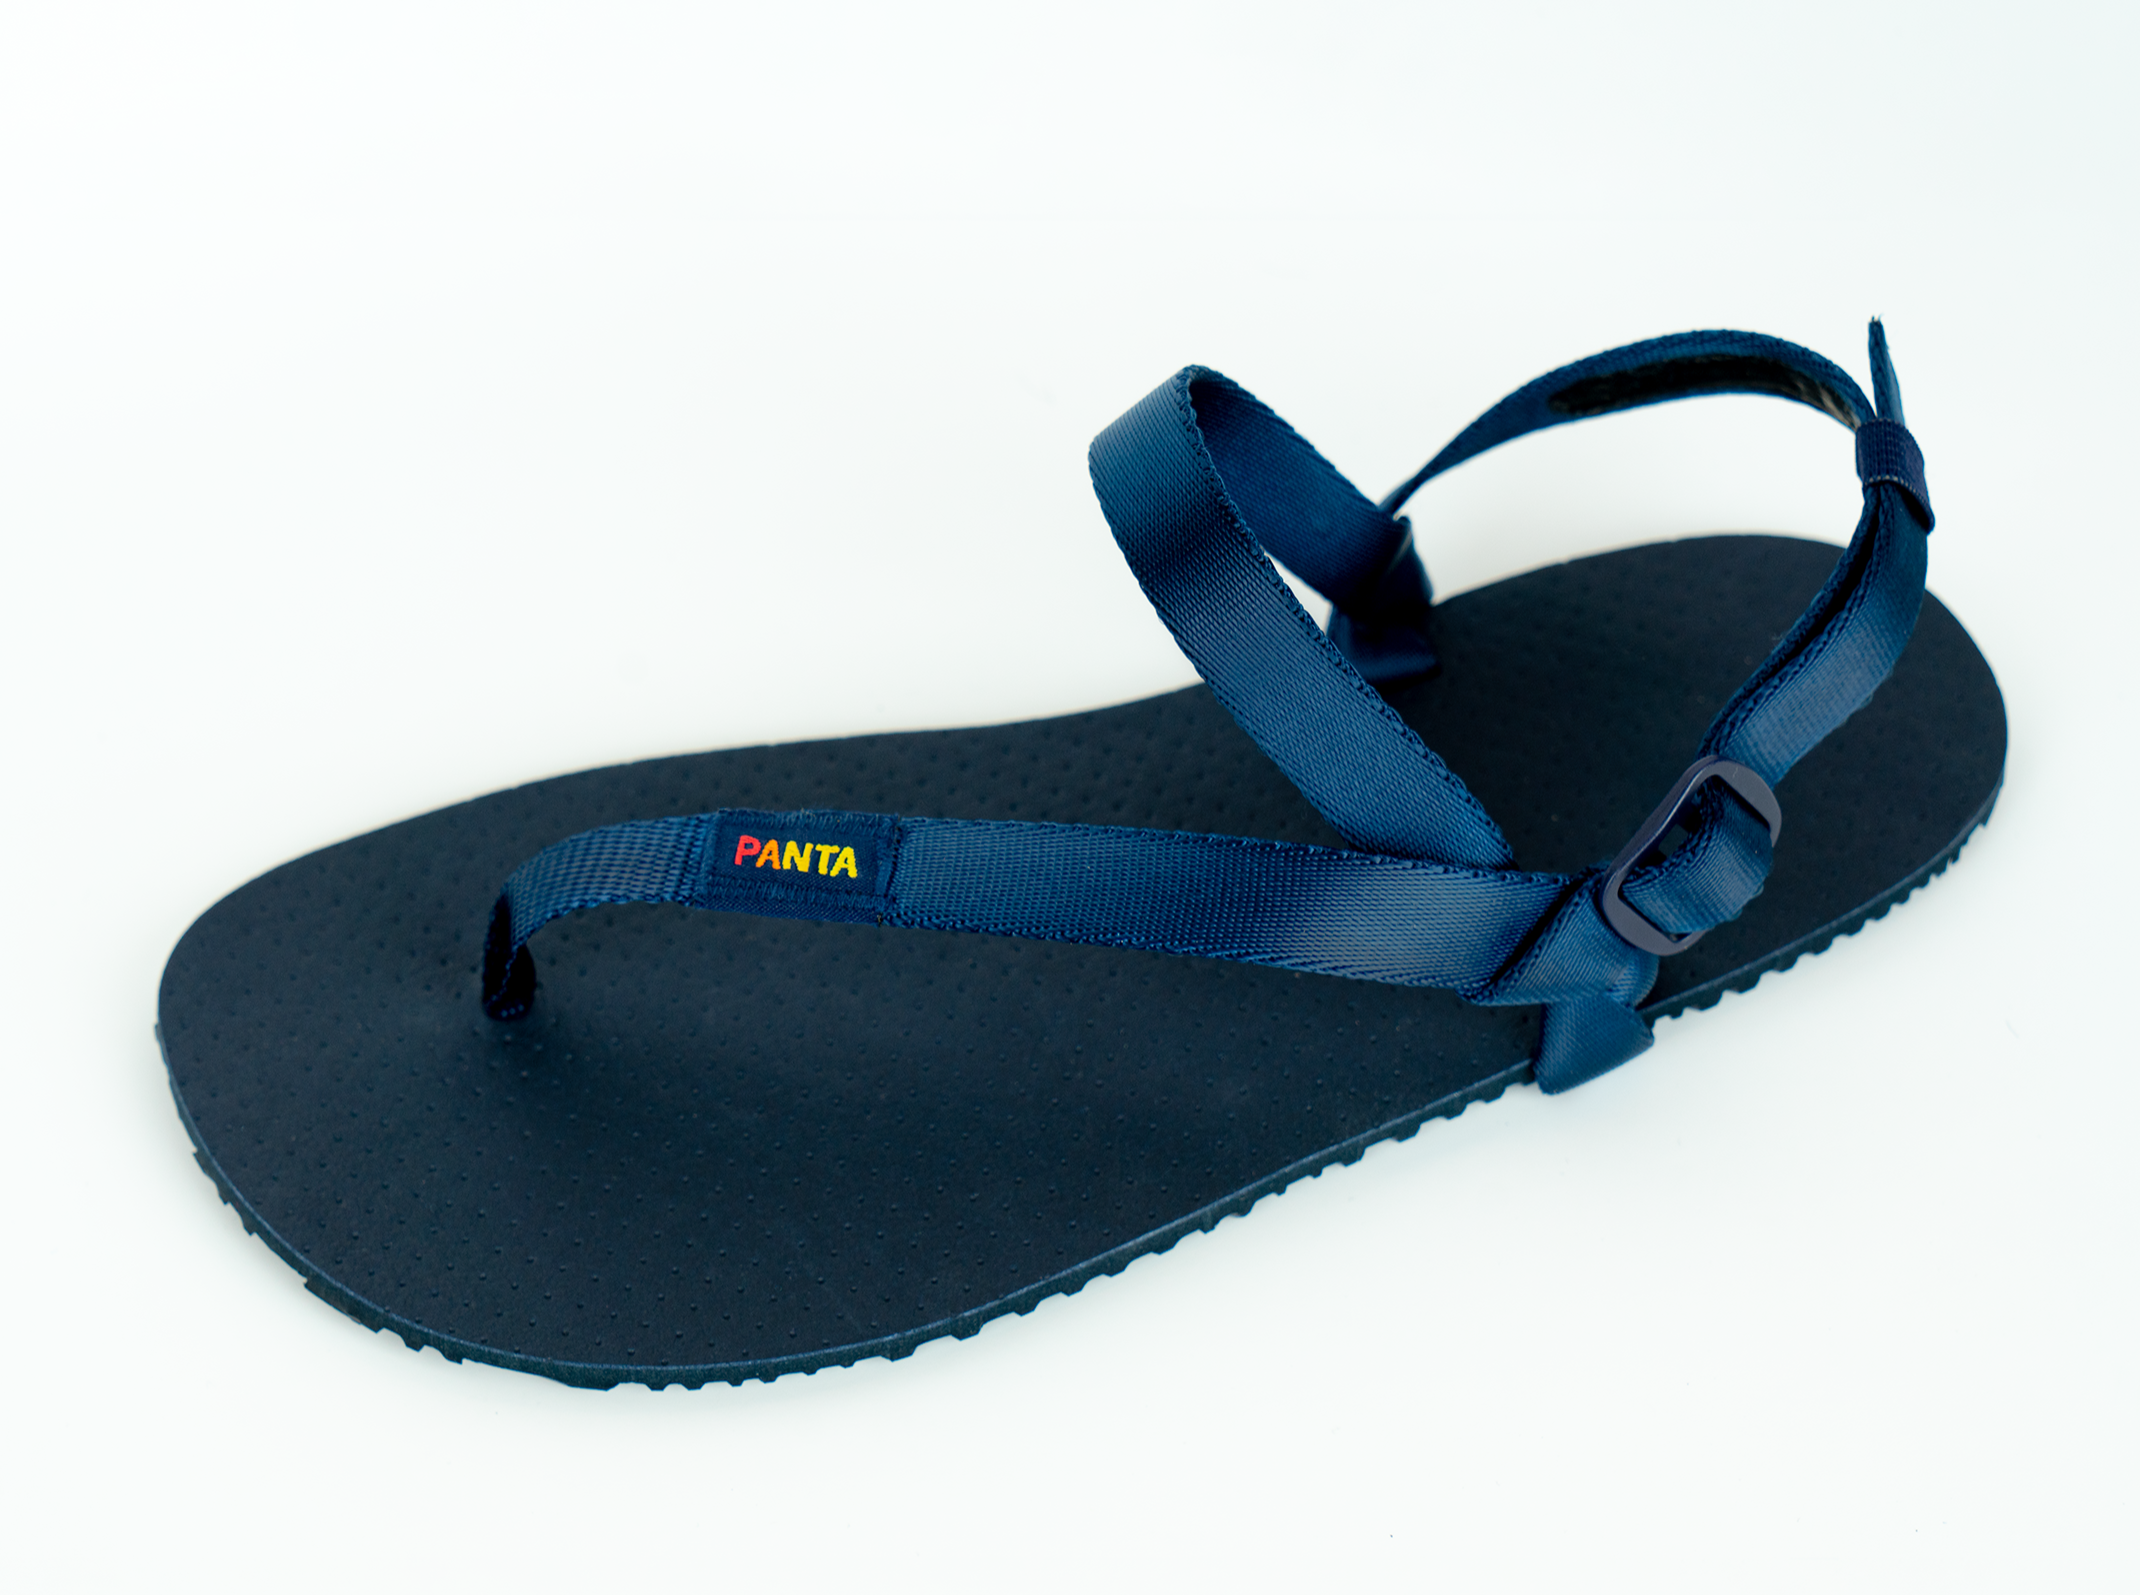 Parnosas sandals in deep blue color from an angle